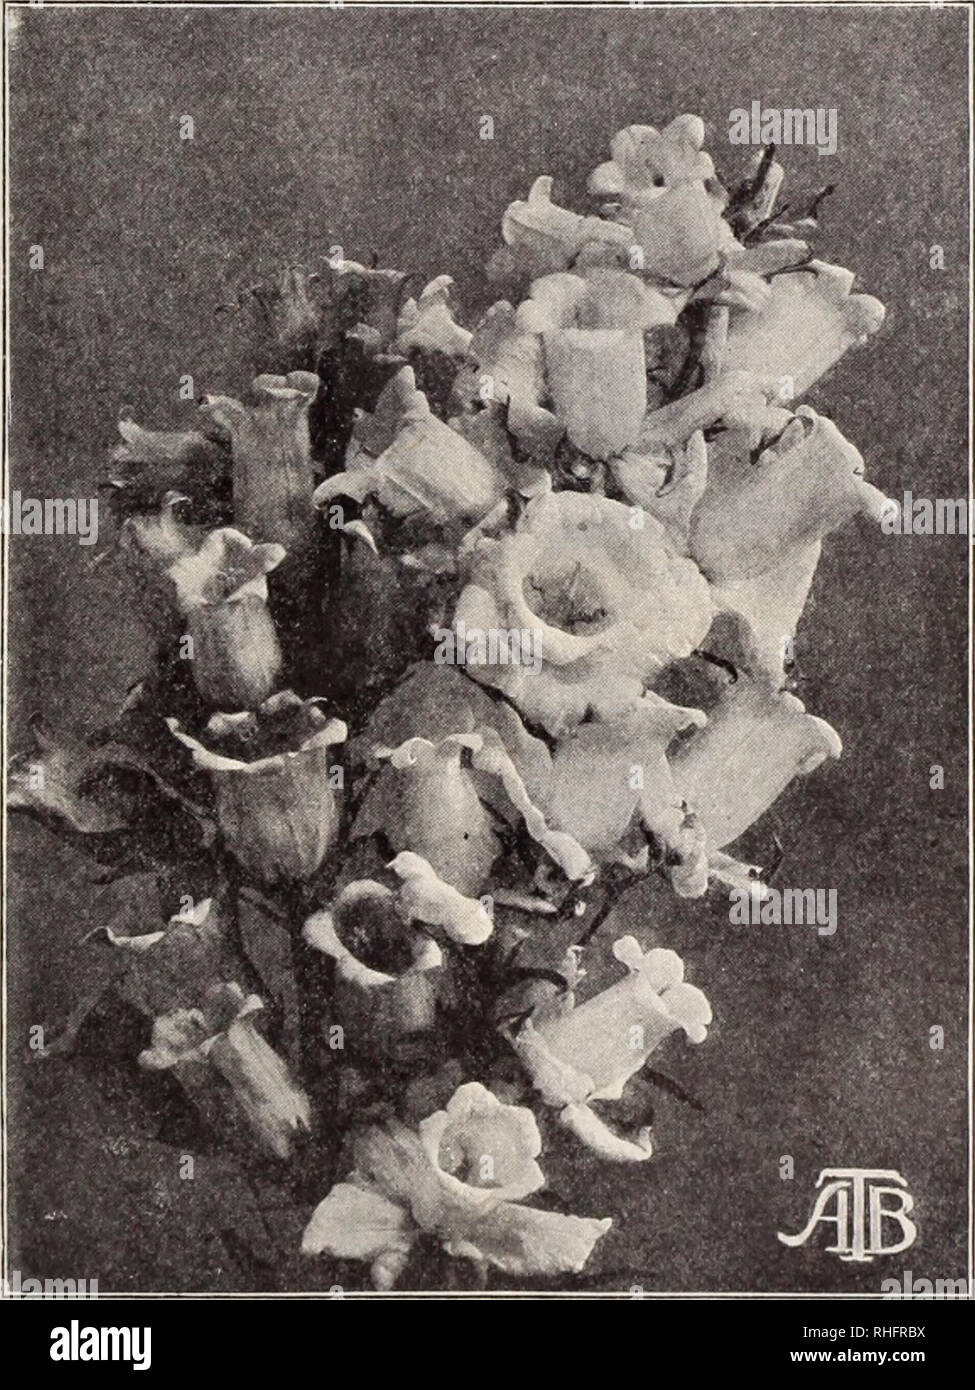 . Boddington's quality bulbs, seeds and plants / Arthur T. Boddington.. Nursery Catalogue. BODDINGTONS ^AX^CLtitt/ SEEDS 23 Calceolaria Hybrida, Boddington's Perfection Campanula (Bell Flower) H.P. The herbaceous Calceolaria is an easily cultivated plant. So long as frost is excluded from the plants in winter they are perfectly safe, and to attempt to hasten growth at any time is a failure. July is the best niontli for .sowing the seed. The great advance made in the habit of the strains offered is remarkable, whilst in the colors there is a marked improvement. Saved b)' England's most famous s Stock Photo